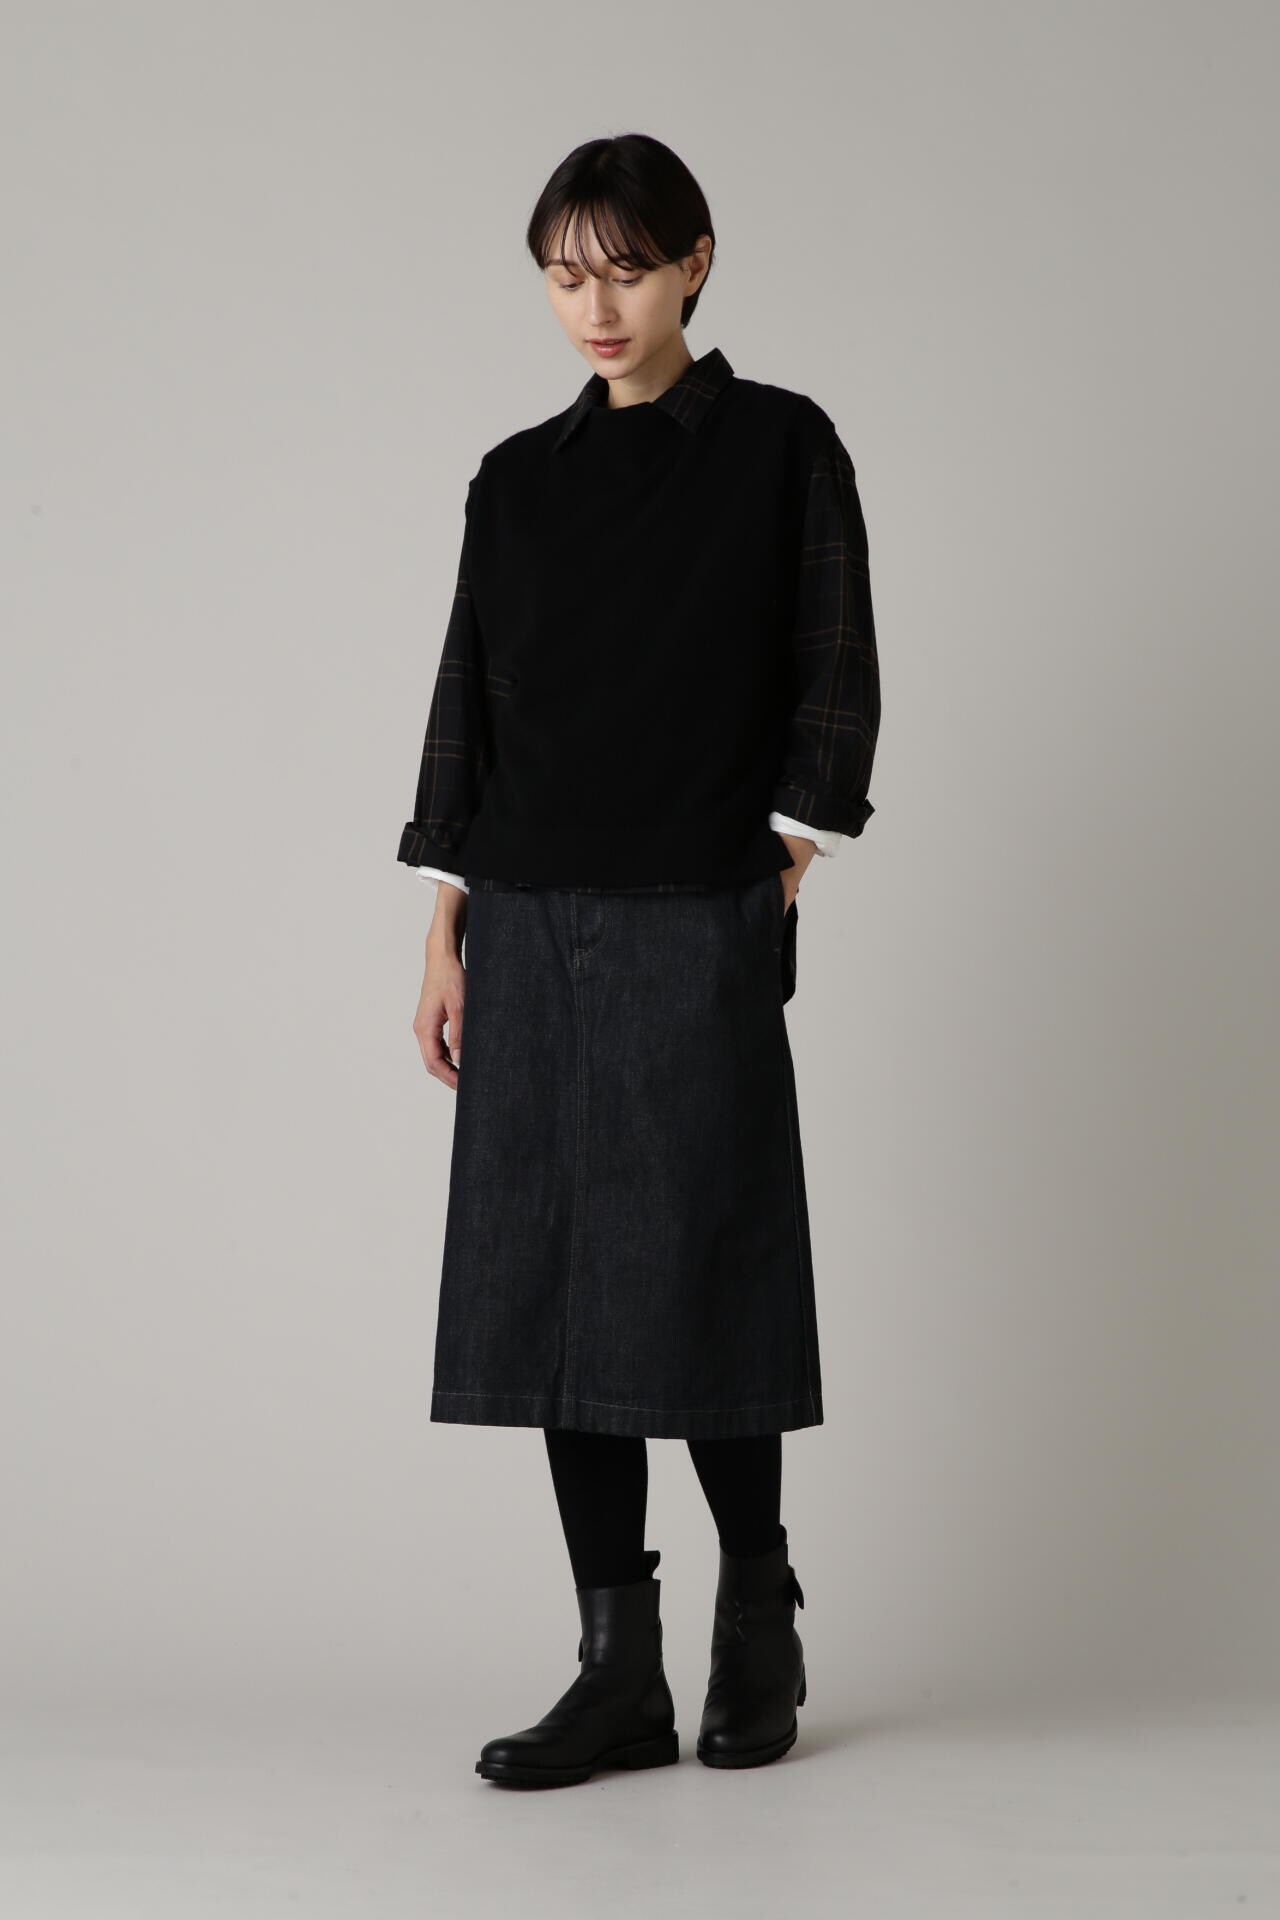 WOOL CASHMERE10